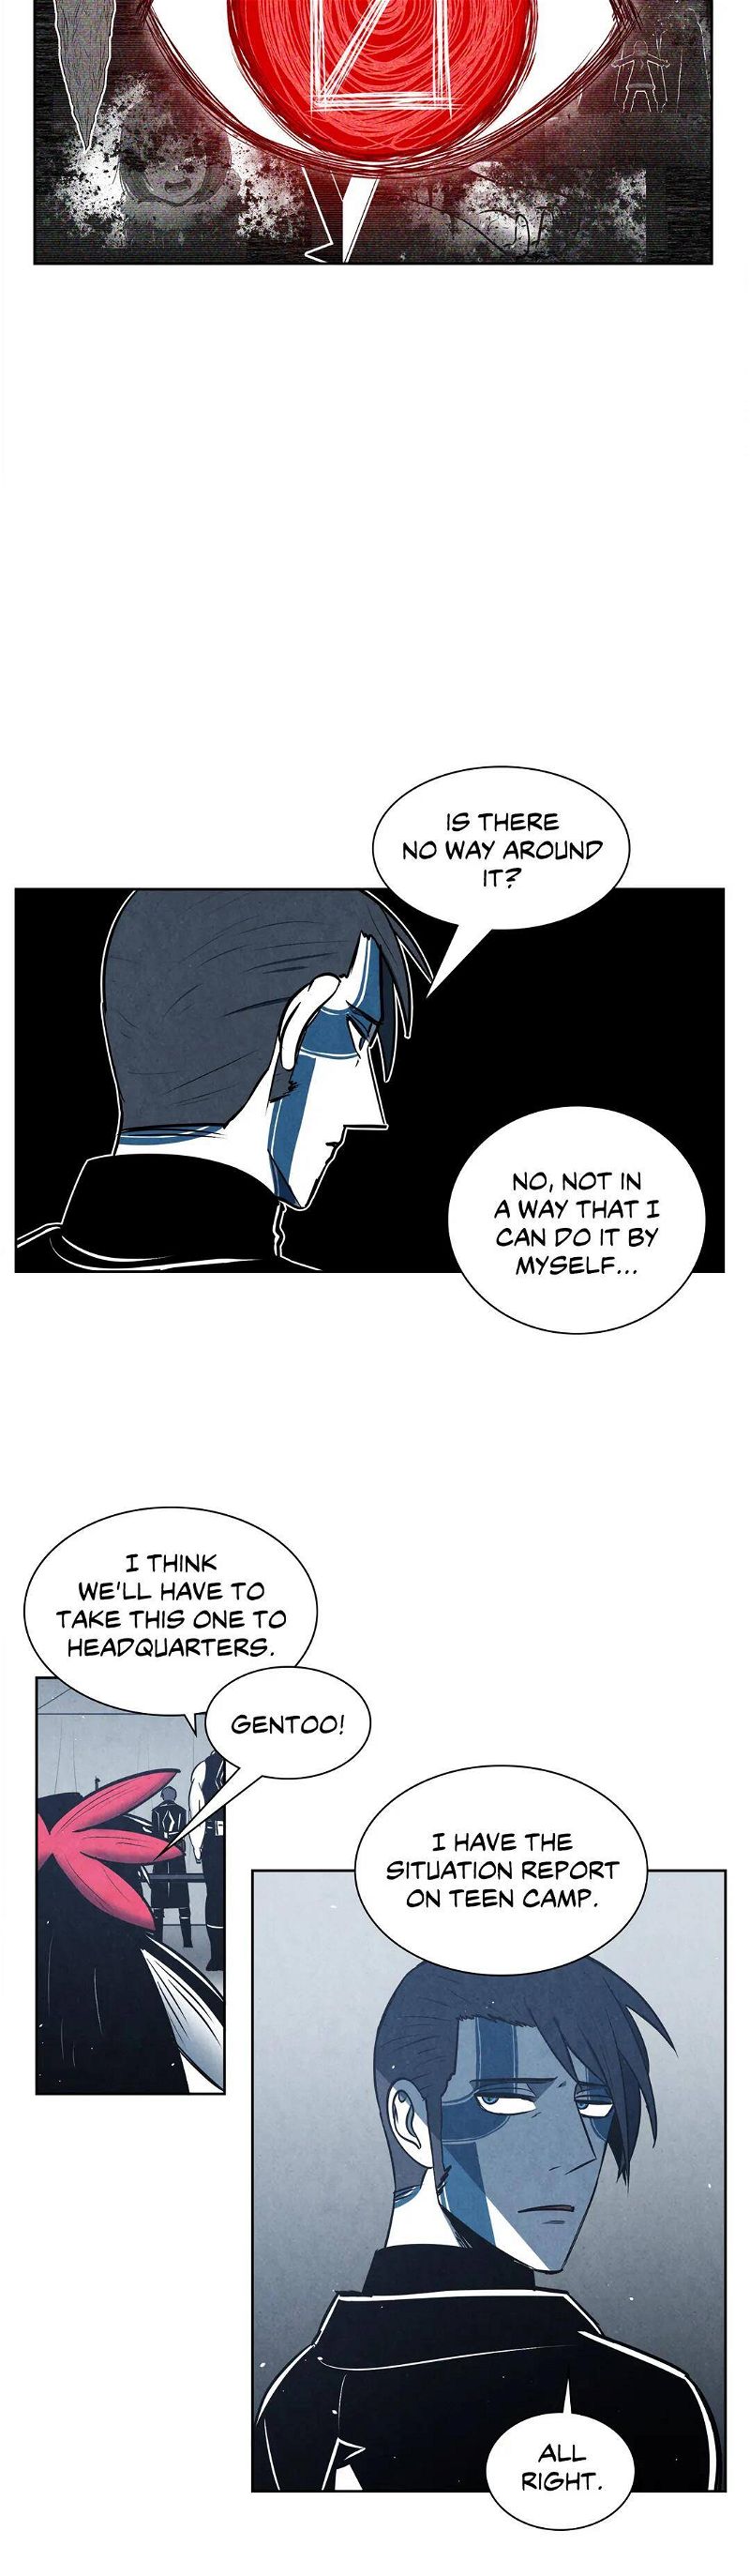 The Ashen Snowfield Chapter 15 page 4